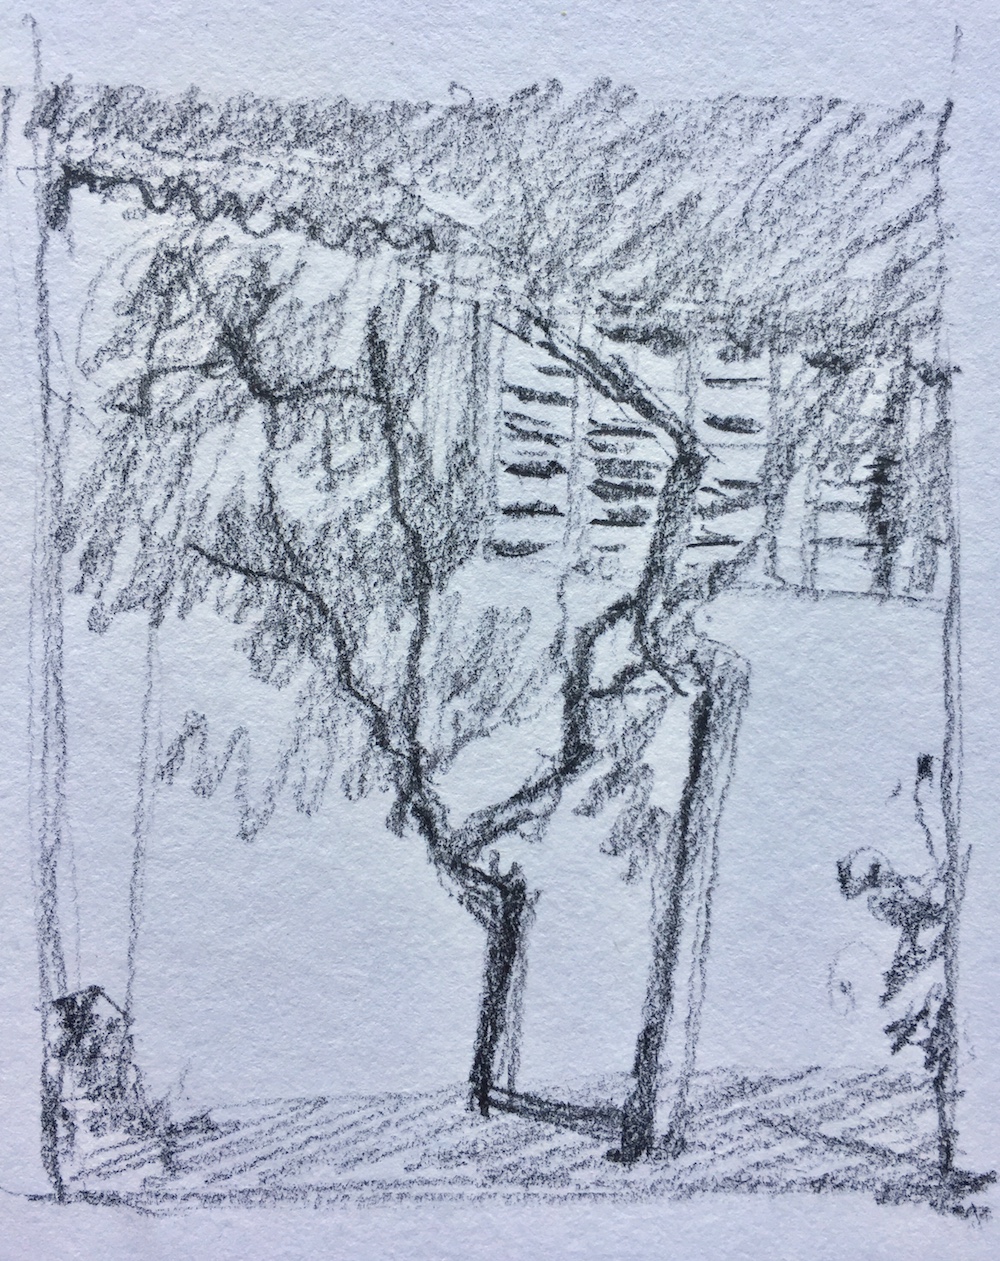 Thumbnails: This was a tree from the village of Calella where I taught my workshop in Spain. The wall was the most gorgeous orange yellow and I loved that the shadow cast by the tree was darker than the tree itself. It will be recognized by a couple of my students for sure!